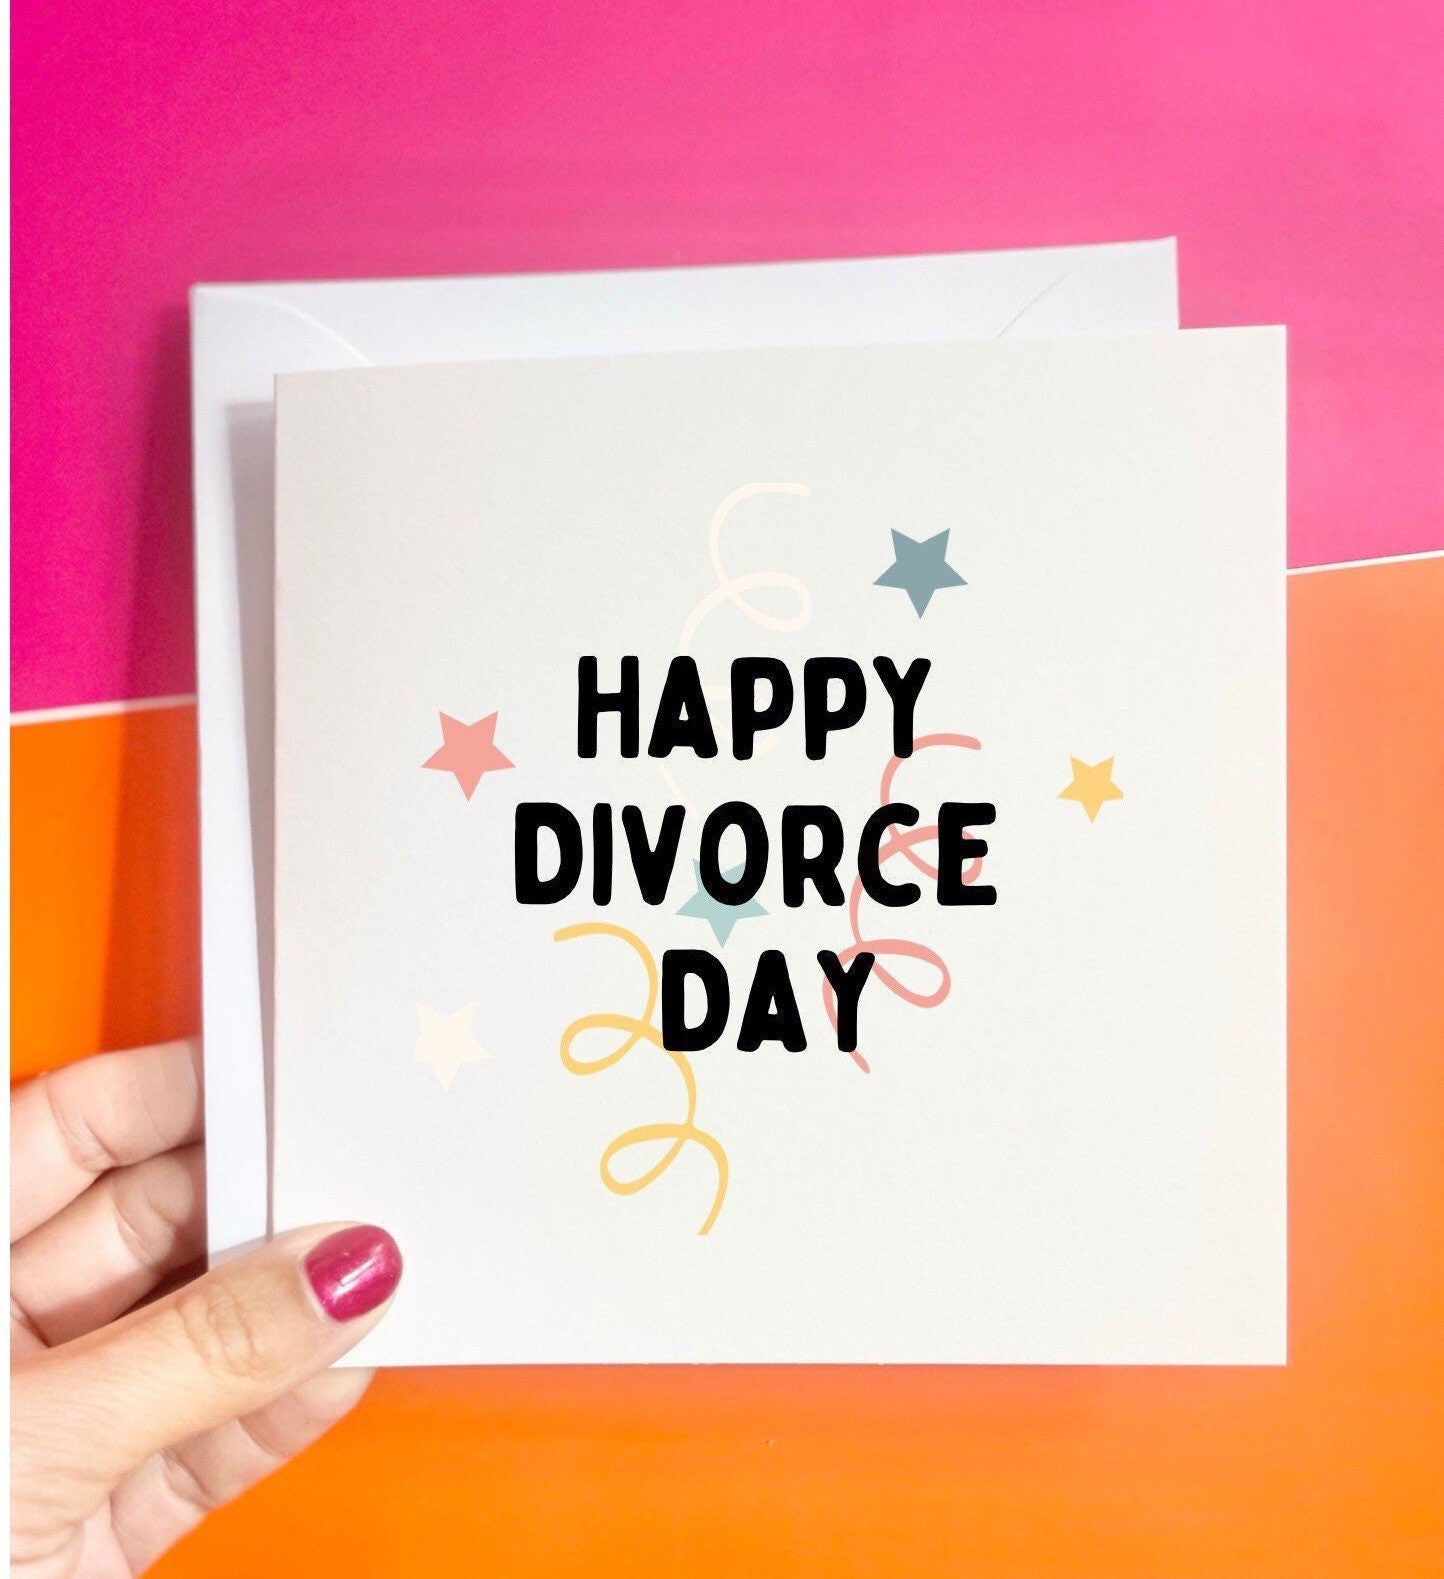 Happy Divorce Day card, novelty break up / divorce greeting card, congrats on your divorce, friends breaking up